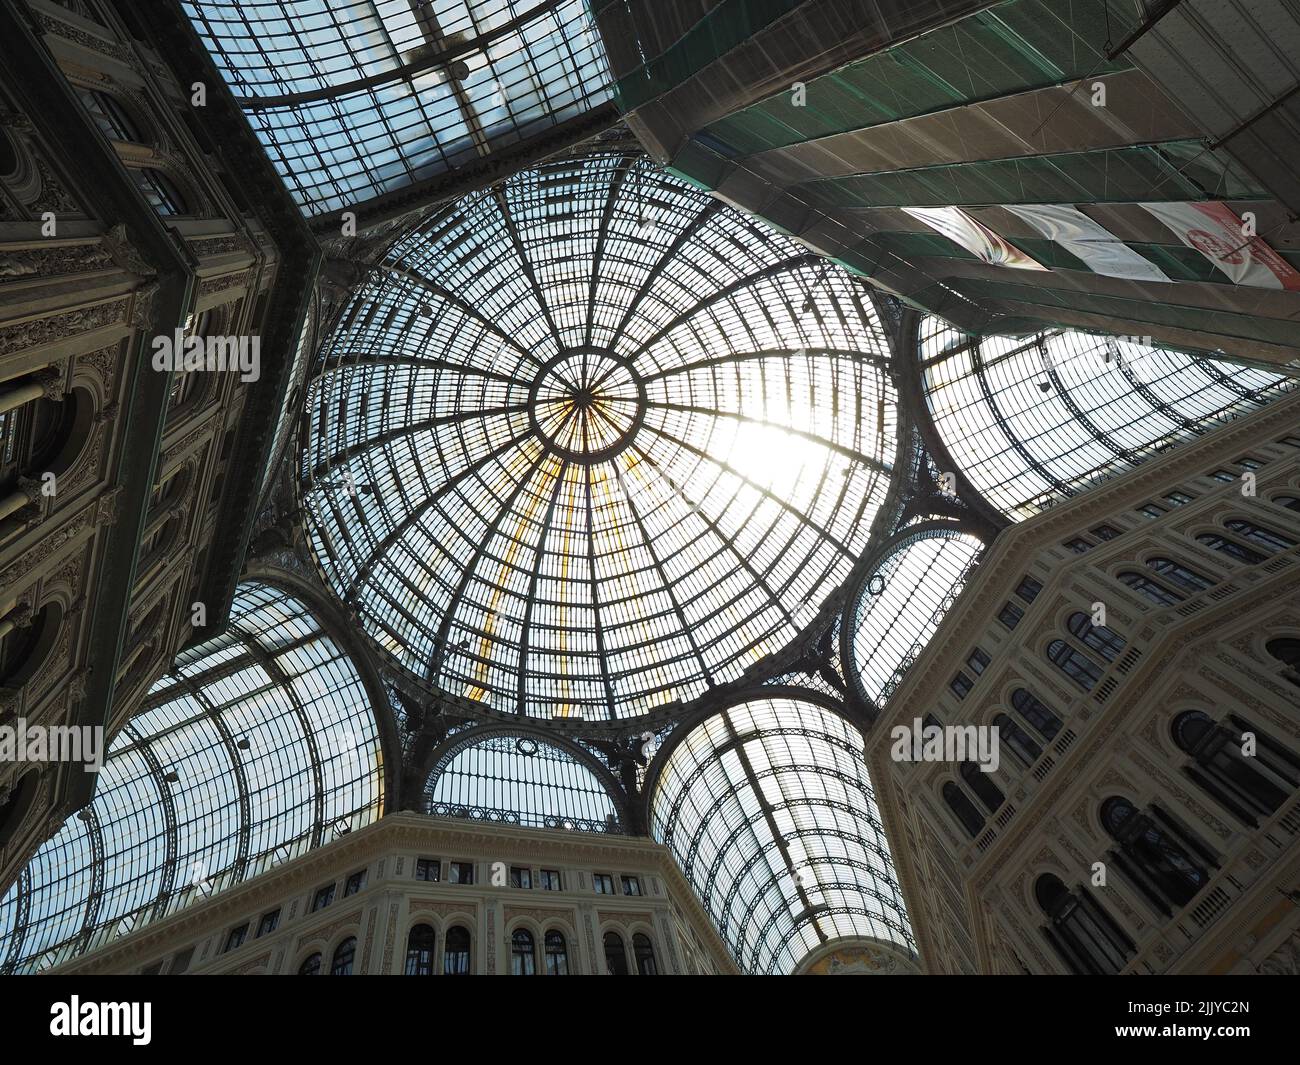 The huge glass dome of the grand Galleria Umberto 1 shopping mall from the inside, Naples city center, Campania, Italy Stock Photo